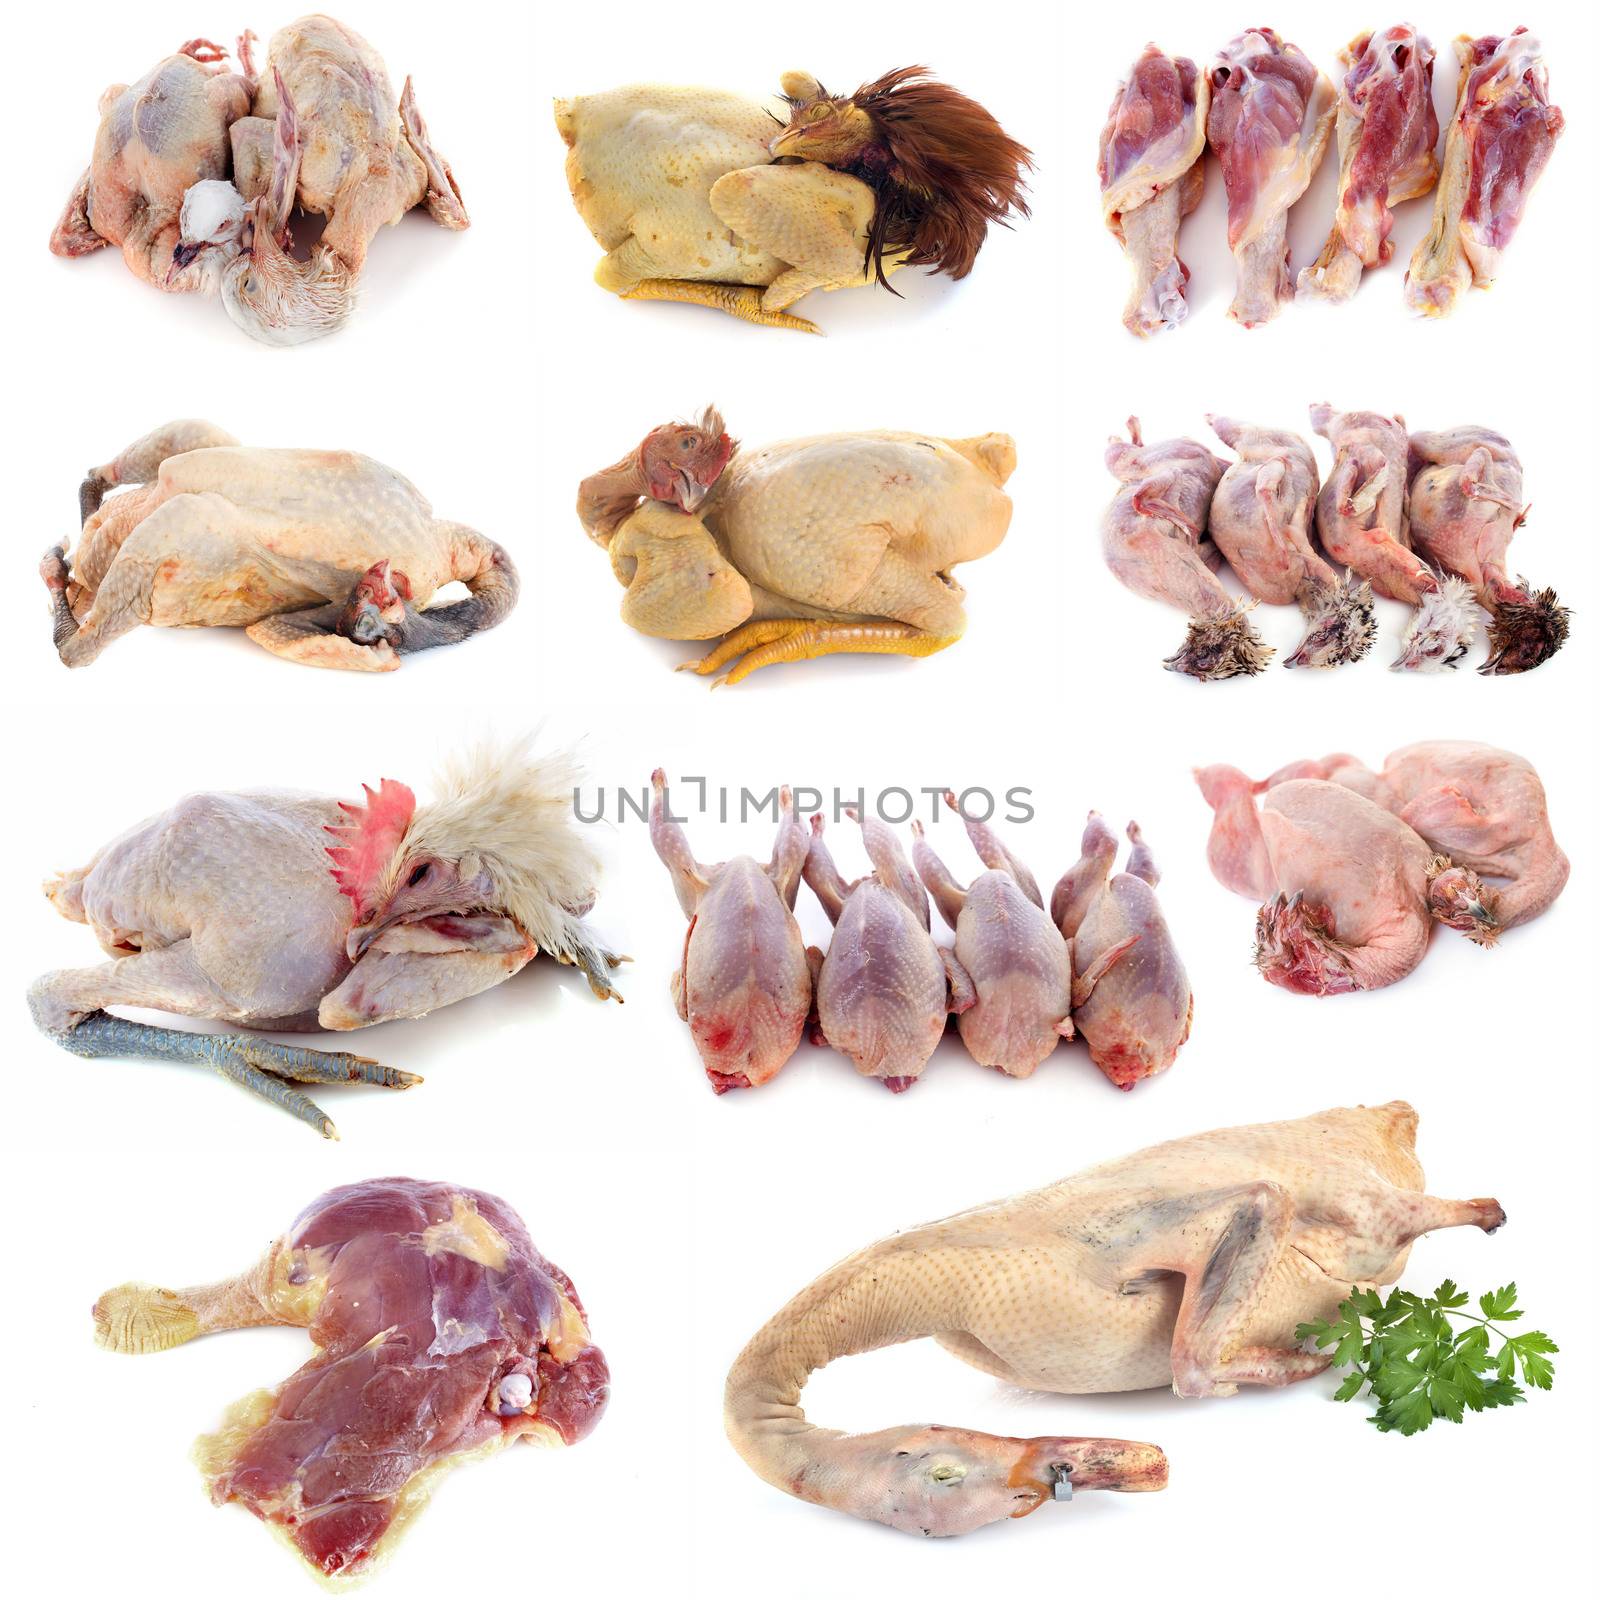 group of poultry meat by cynoclub